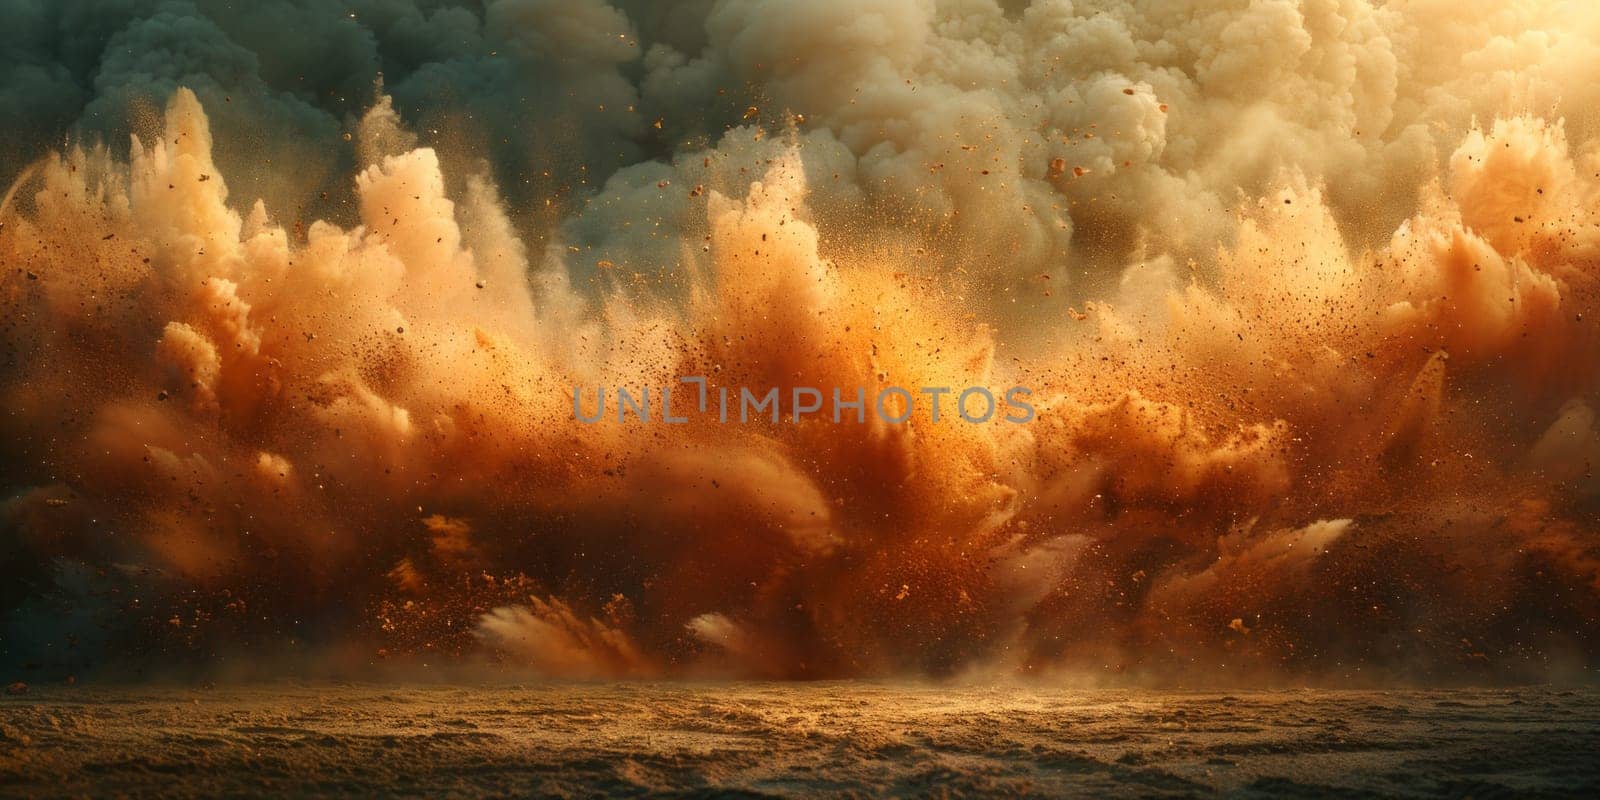 A massive explosion of smoke and dust billows up from the water, creating a mesmerizing scene of chaos and transformation.